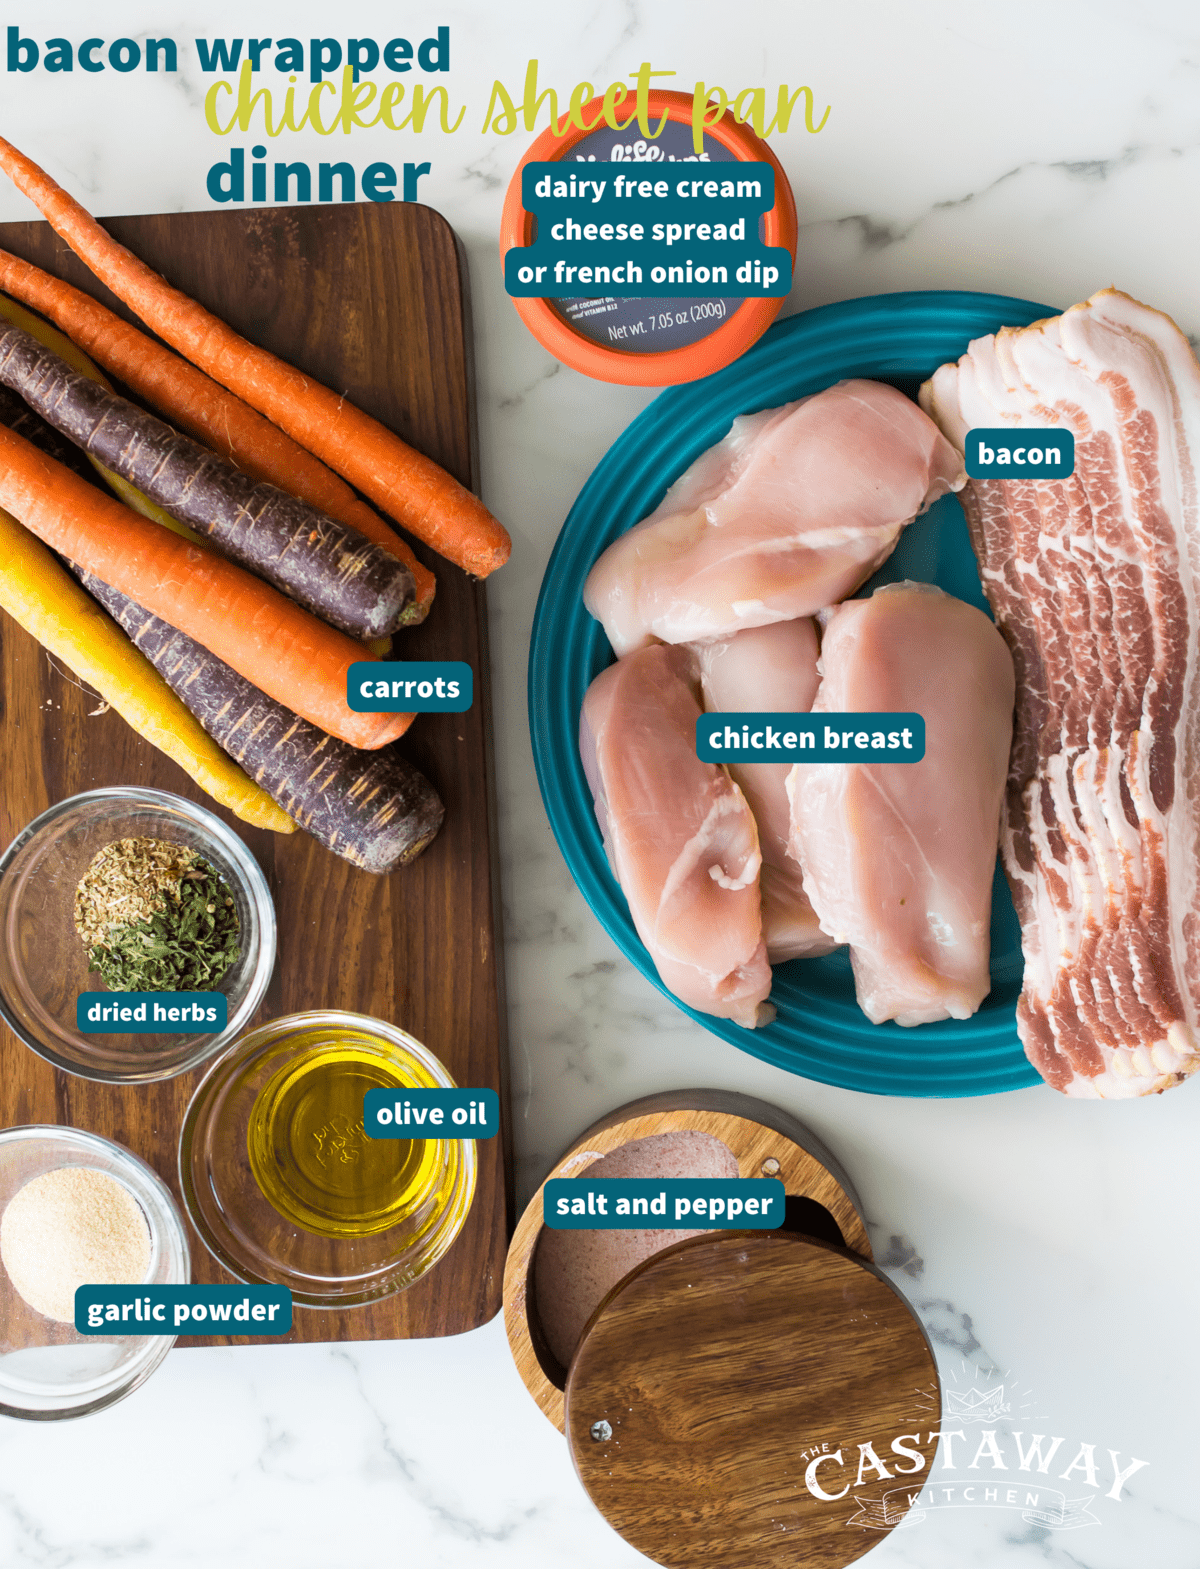 bacon wrapped chicken sheet pan dinner ingredients